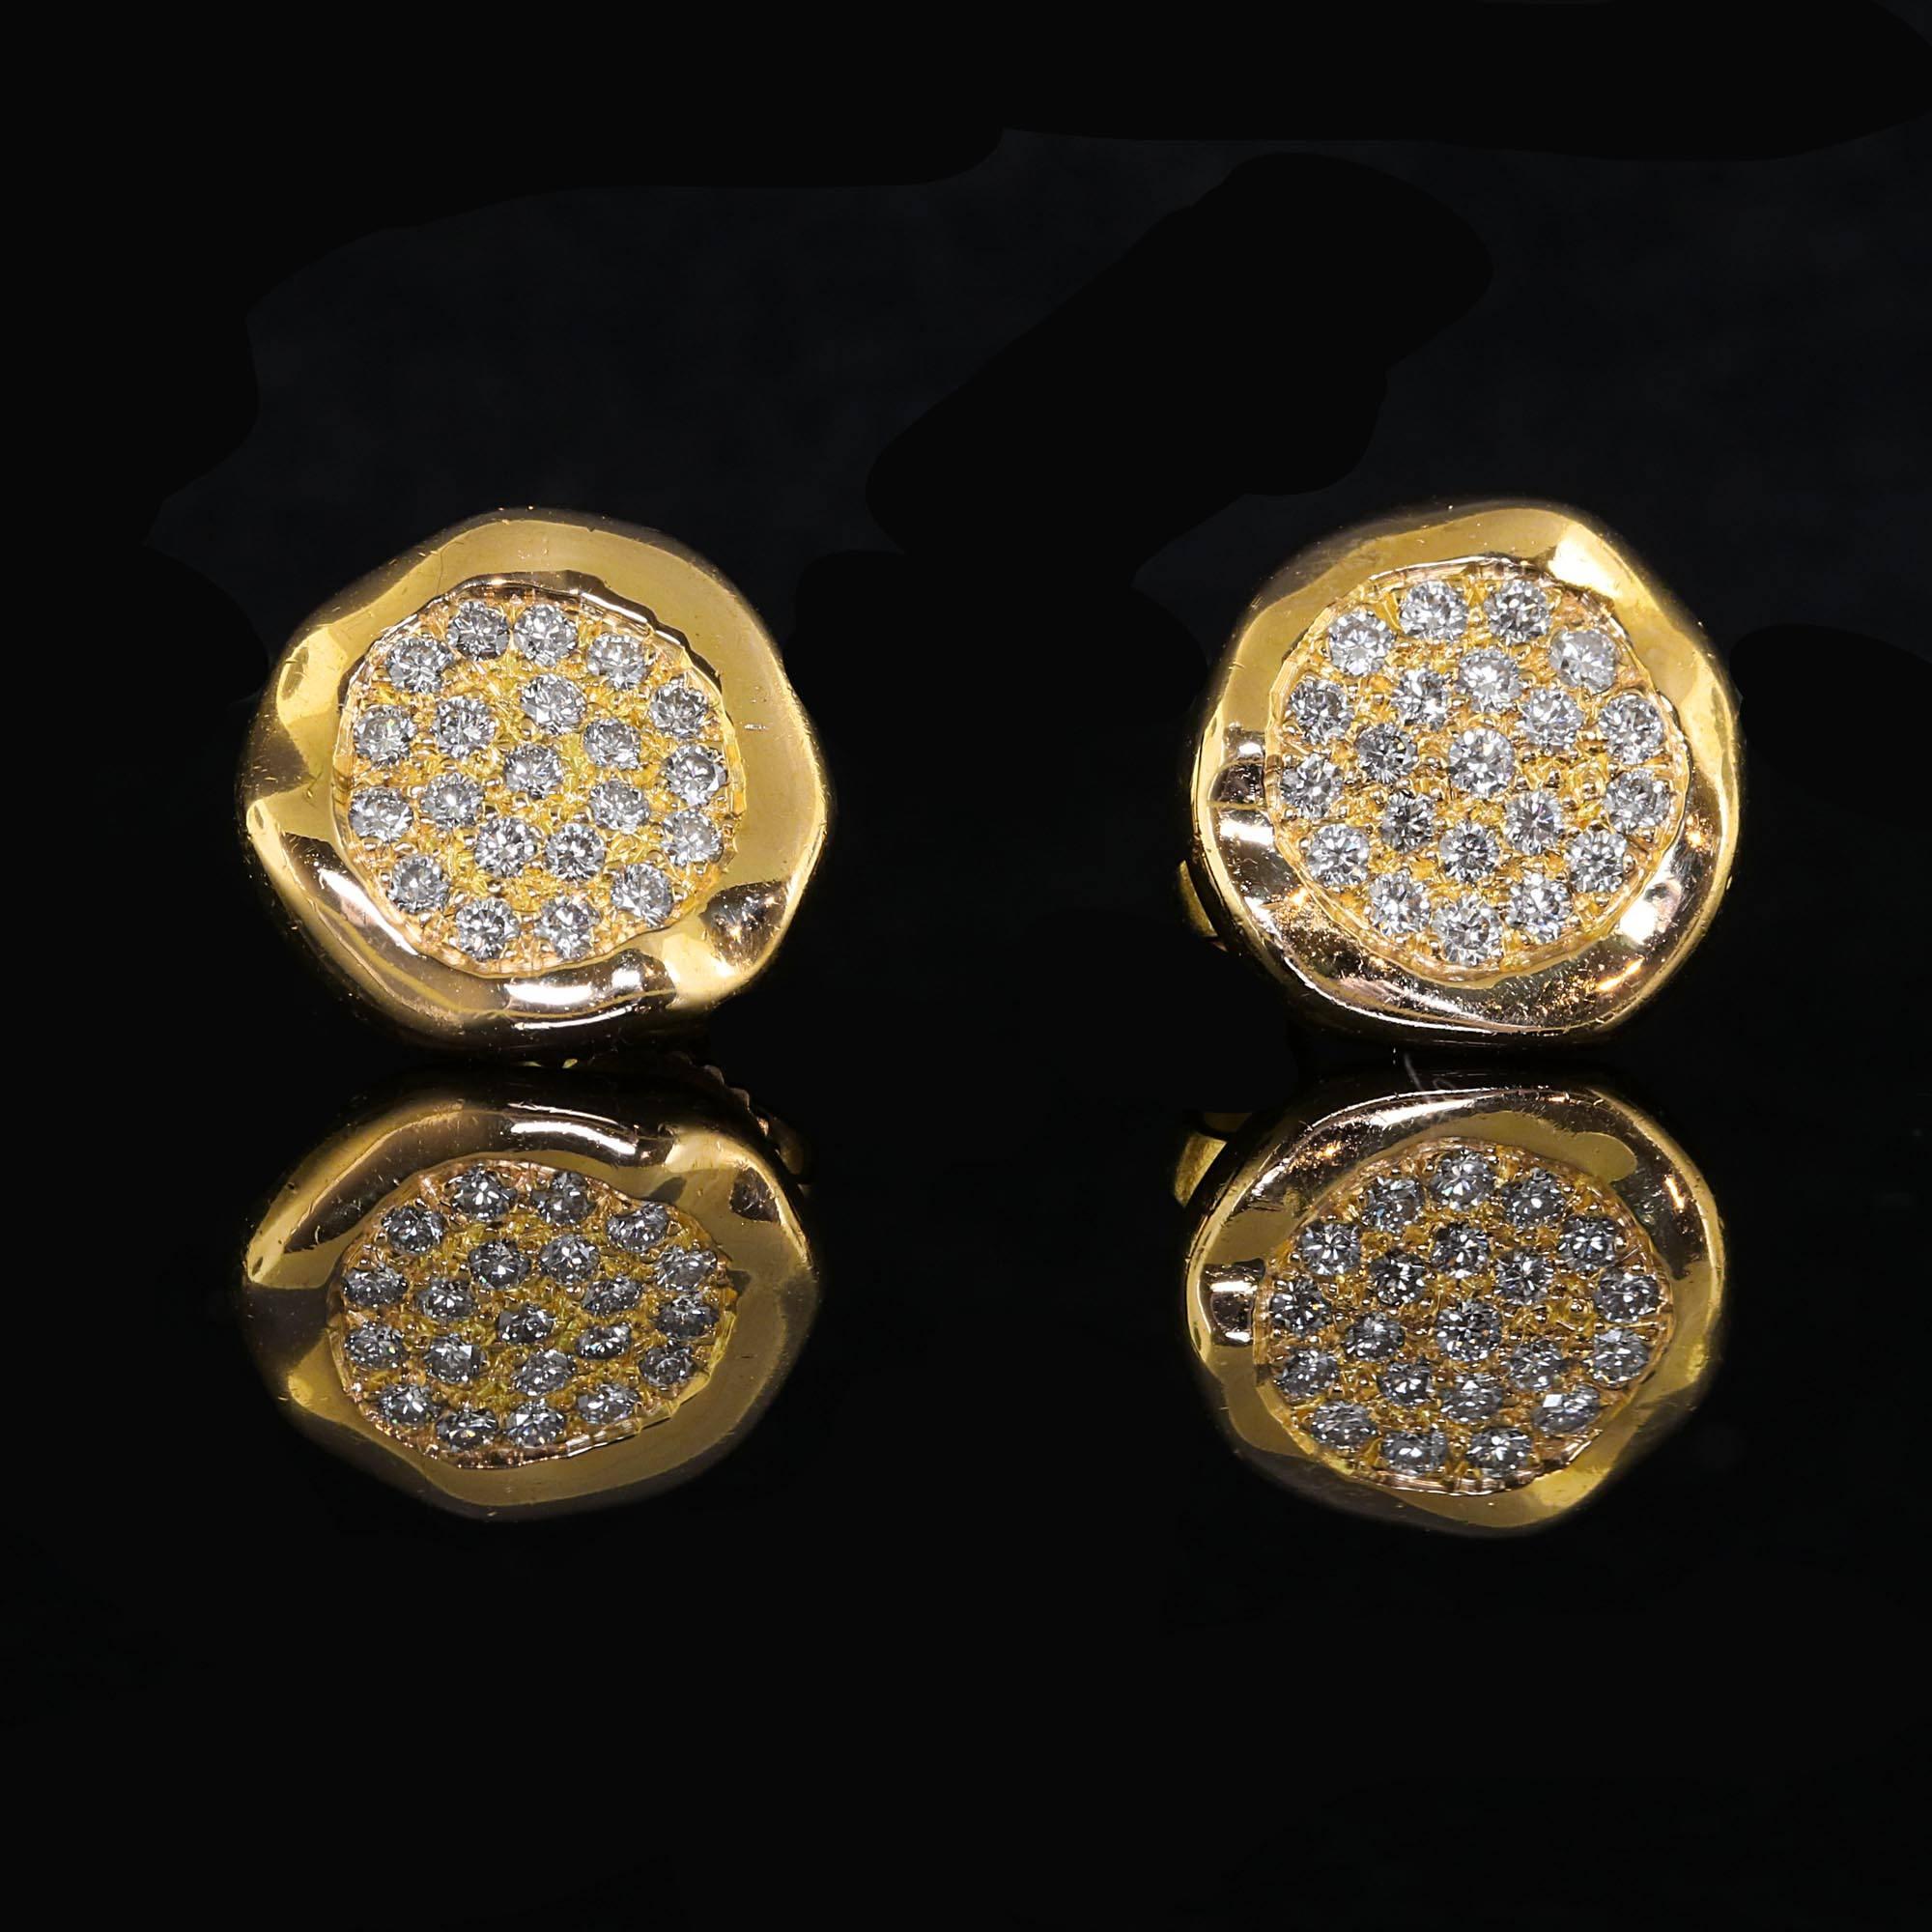 Perfect condition, beautiful pair of Tiffany and Company yellow gold earrings. The designer for these earrings is Angela Cummings. They are crafted in 18 kt yellow gold and adorned with approximately .50 carats of diamonds. All the diamonds are